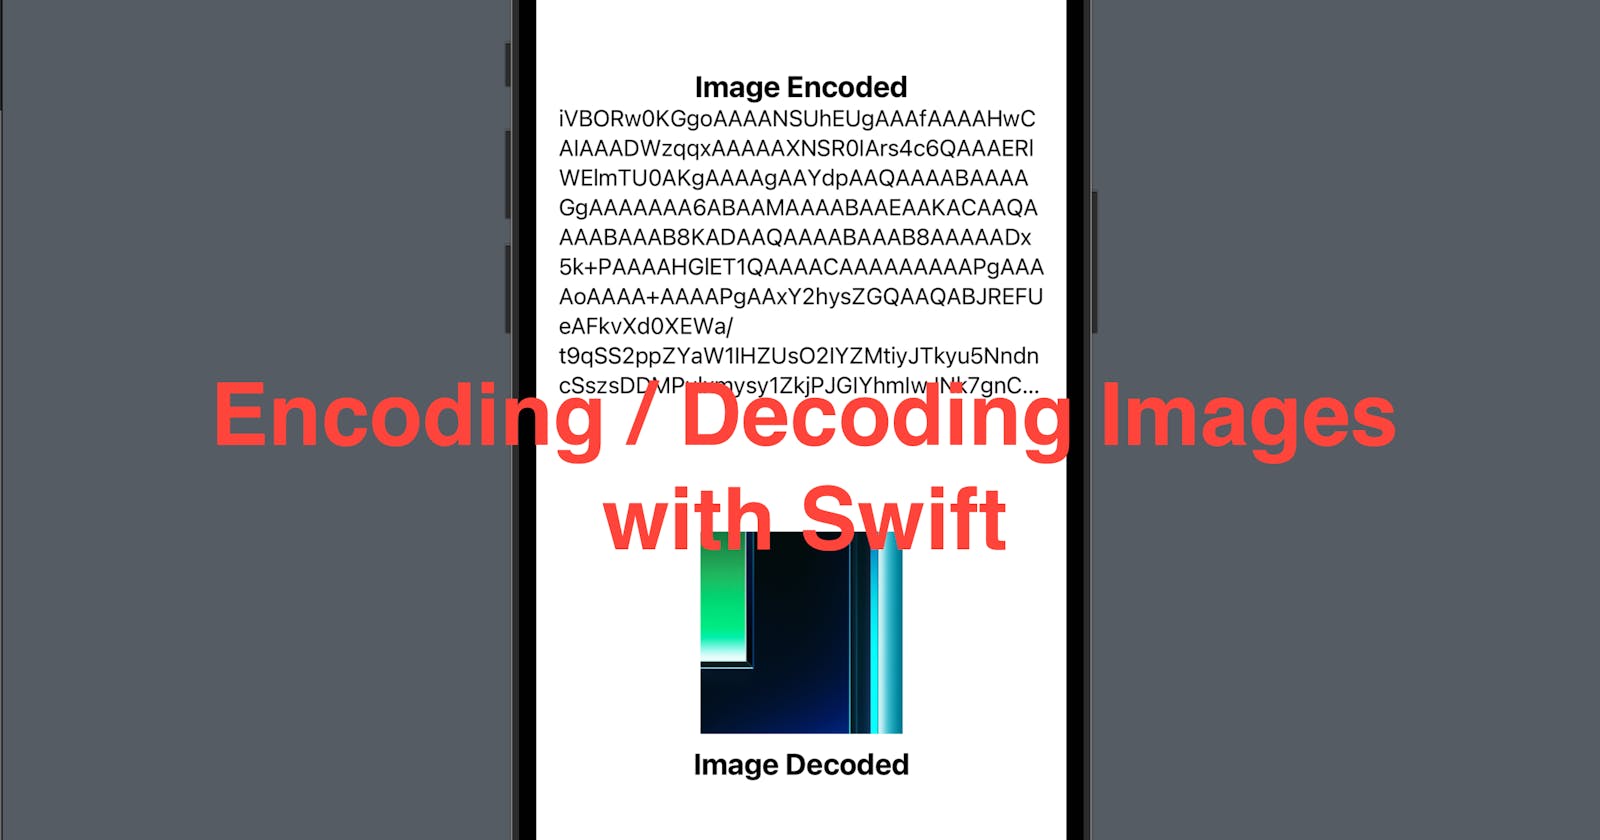 Encode & Decode an Image with Swift